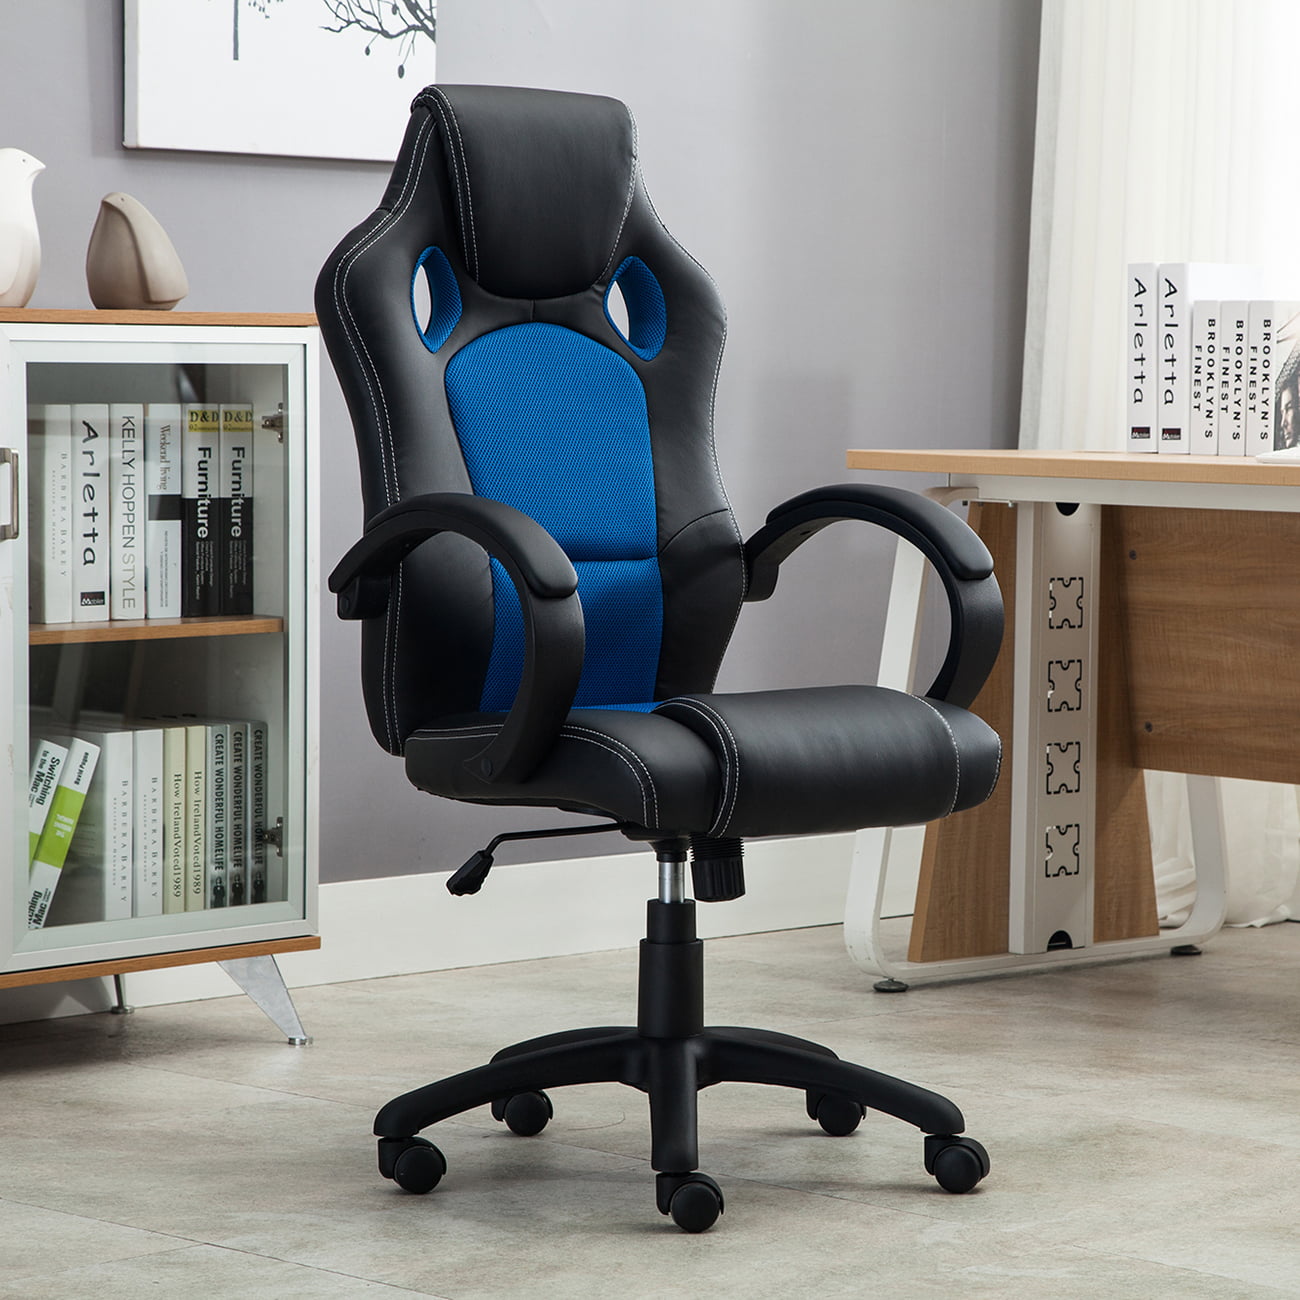 Belleze Racing High Back Office Chair Pu Leather Computer Desk